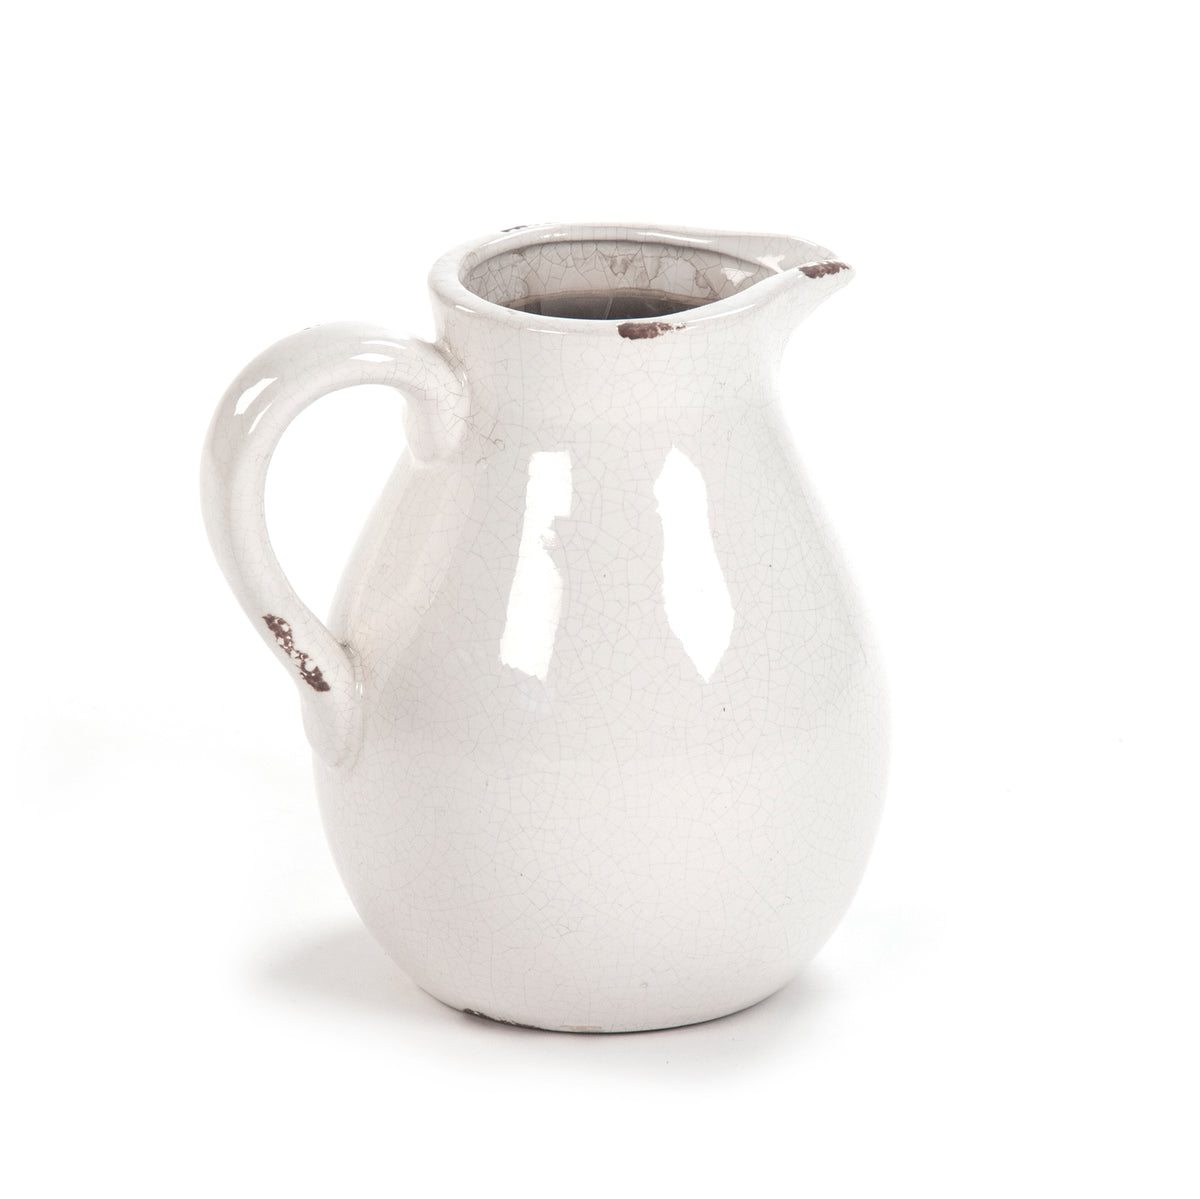 Distressed Crackle White Pitcher (6728L A369) by Zentique